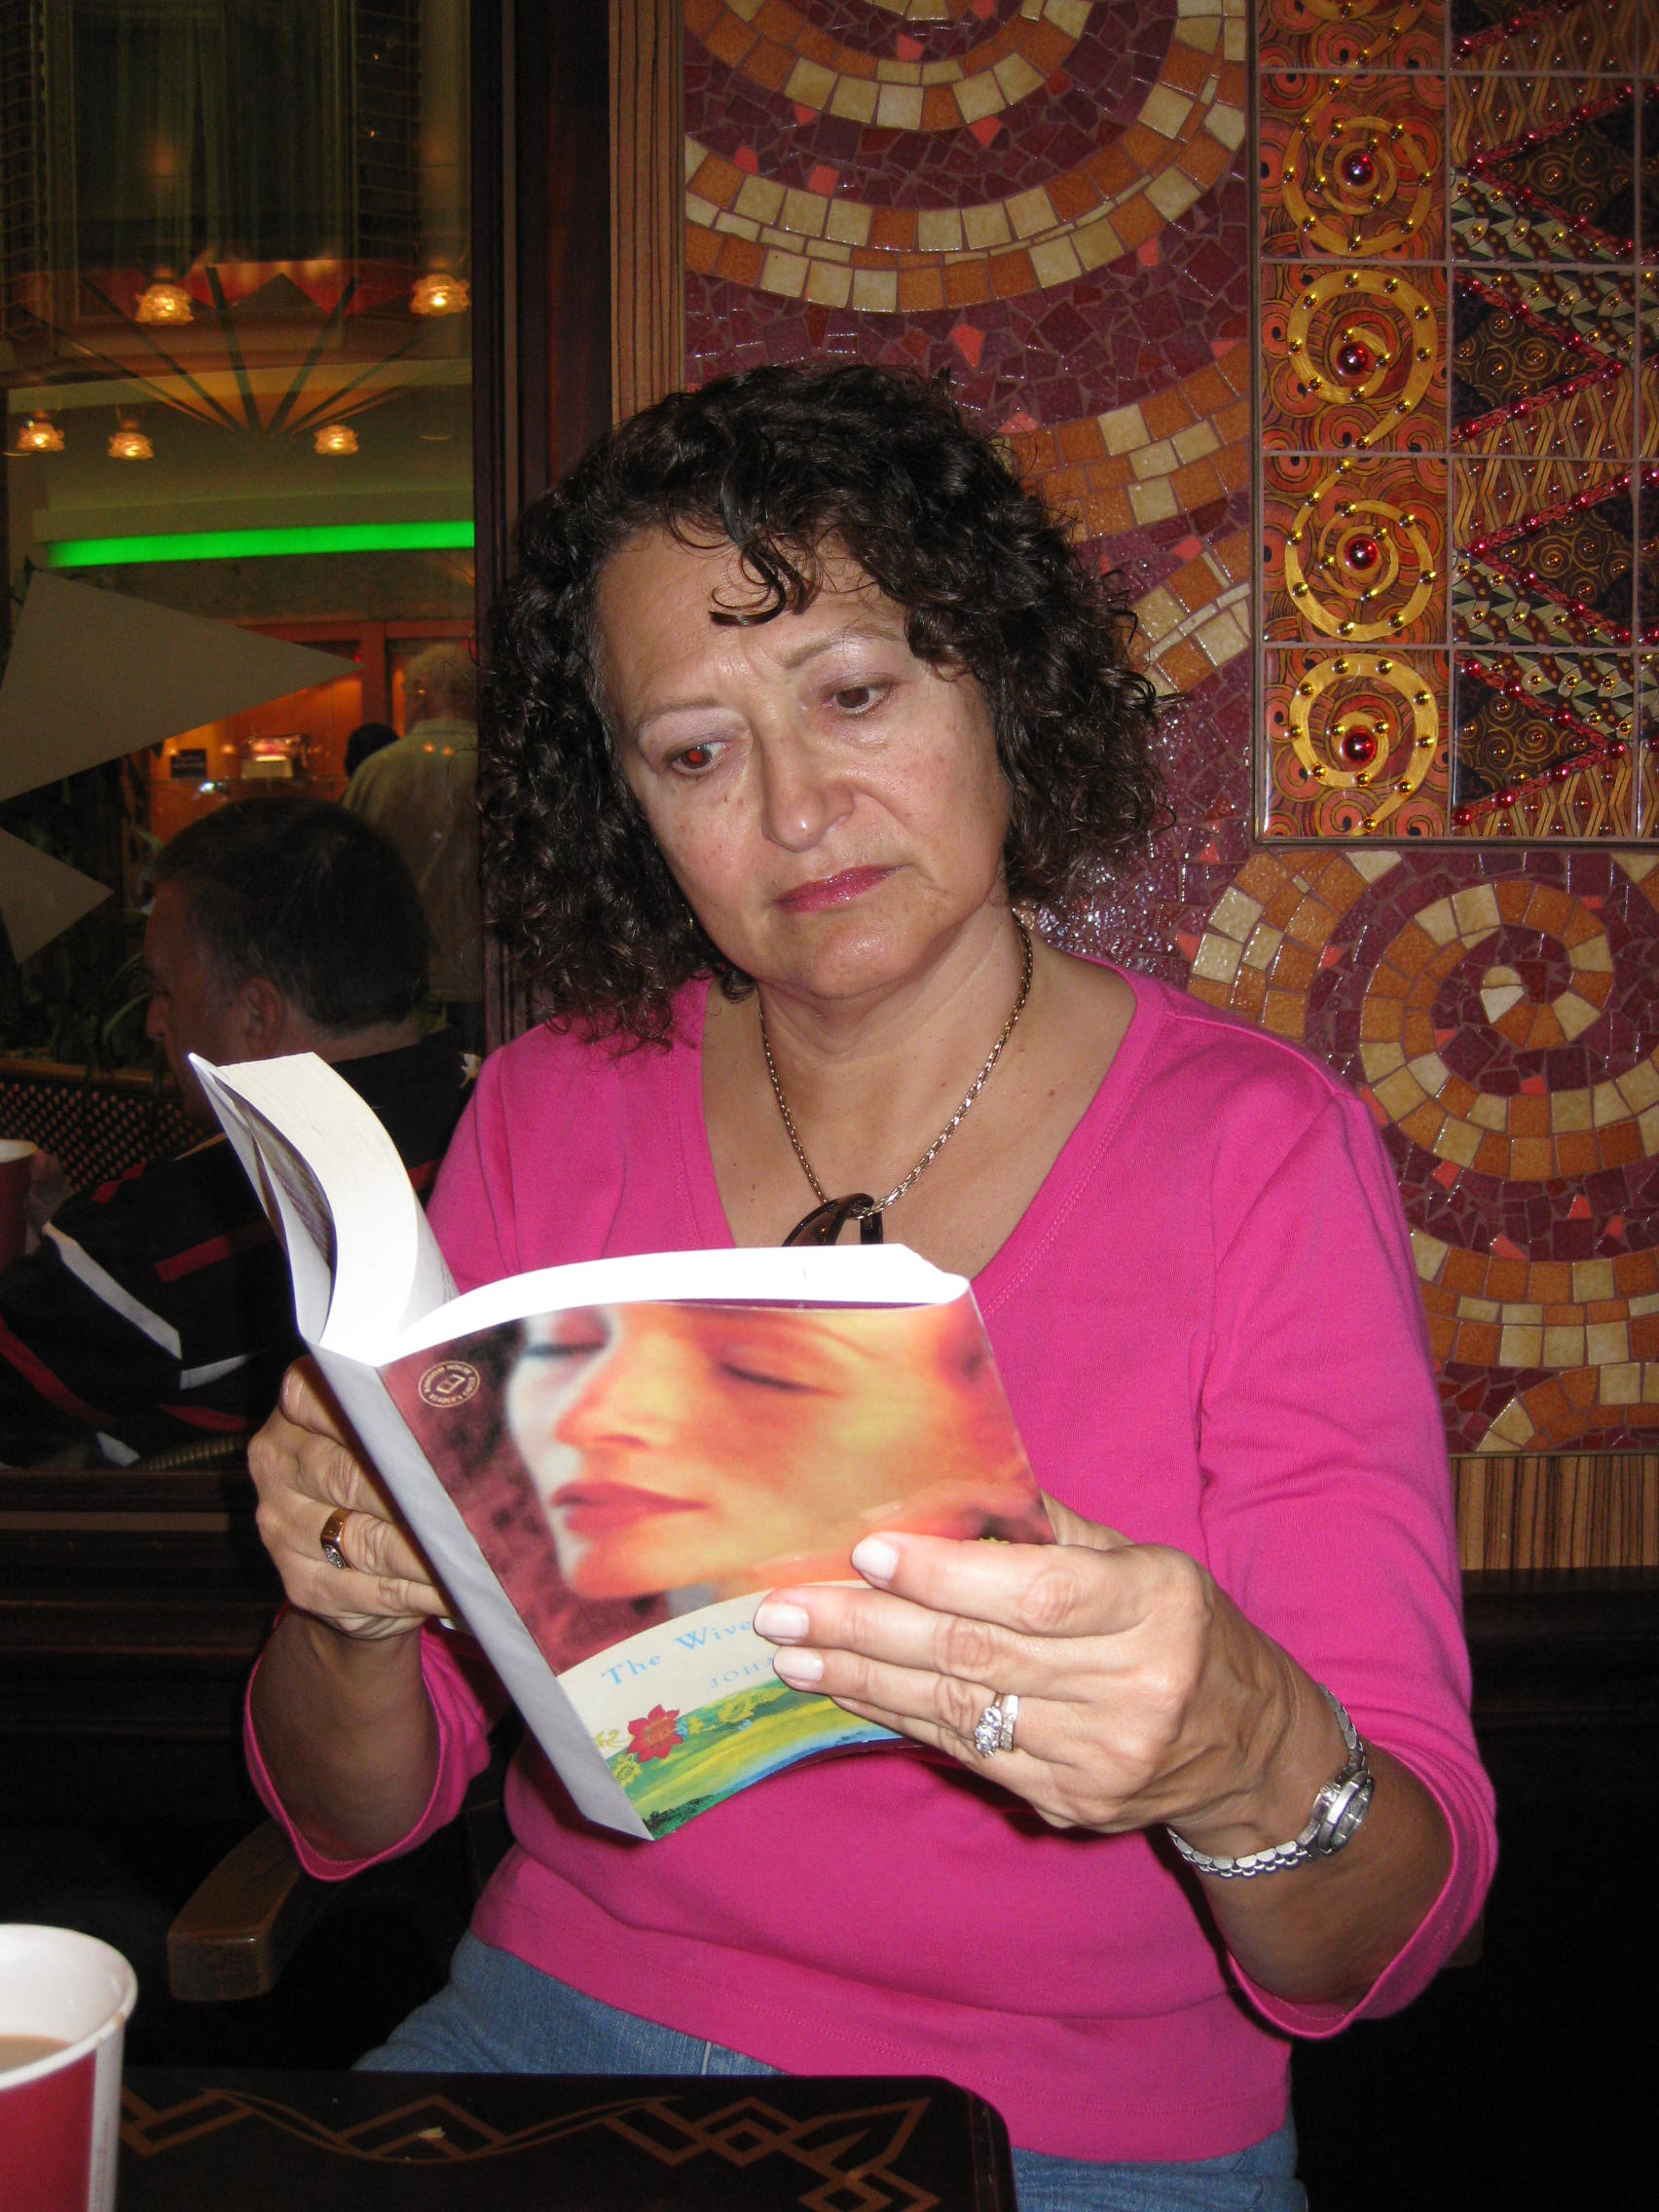 READING "WIVES" IN MALAGA, SPAIN